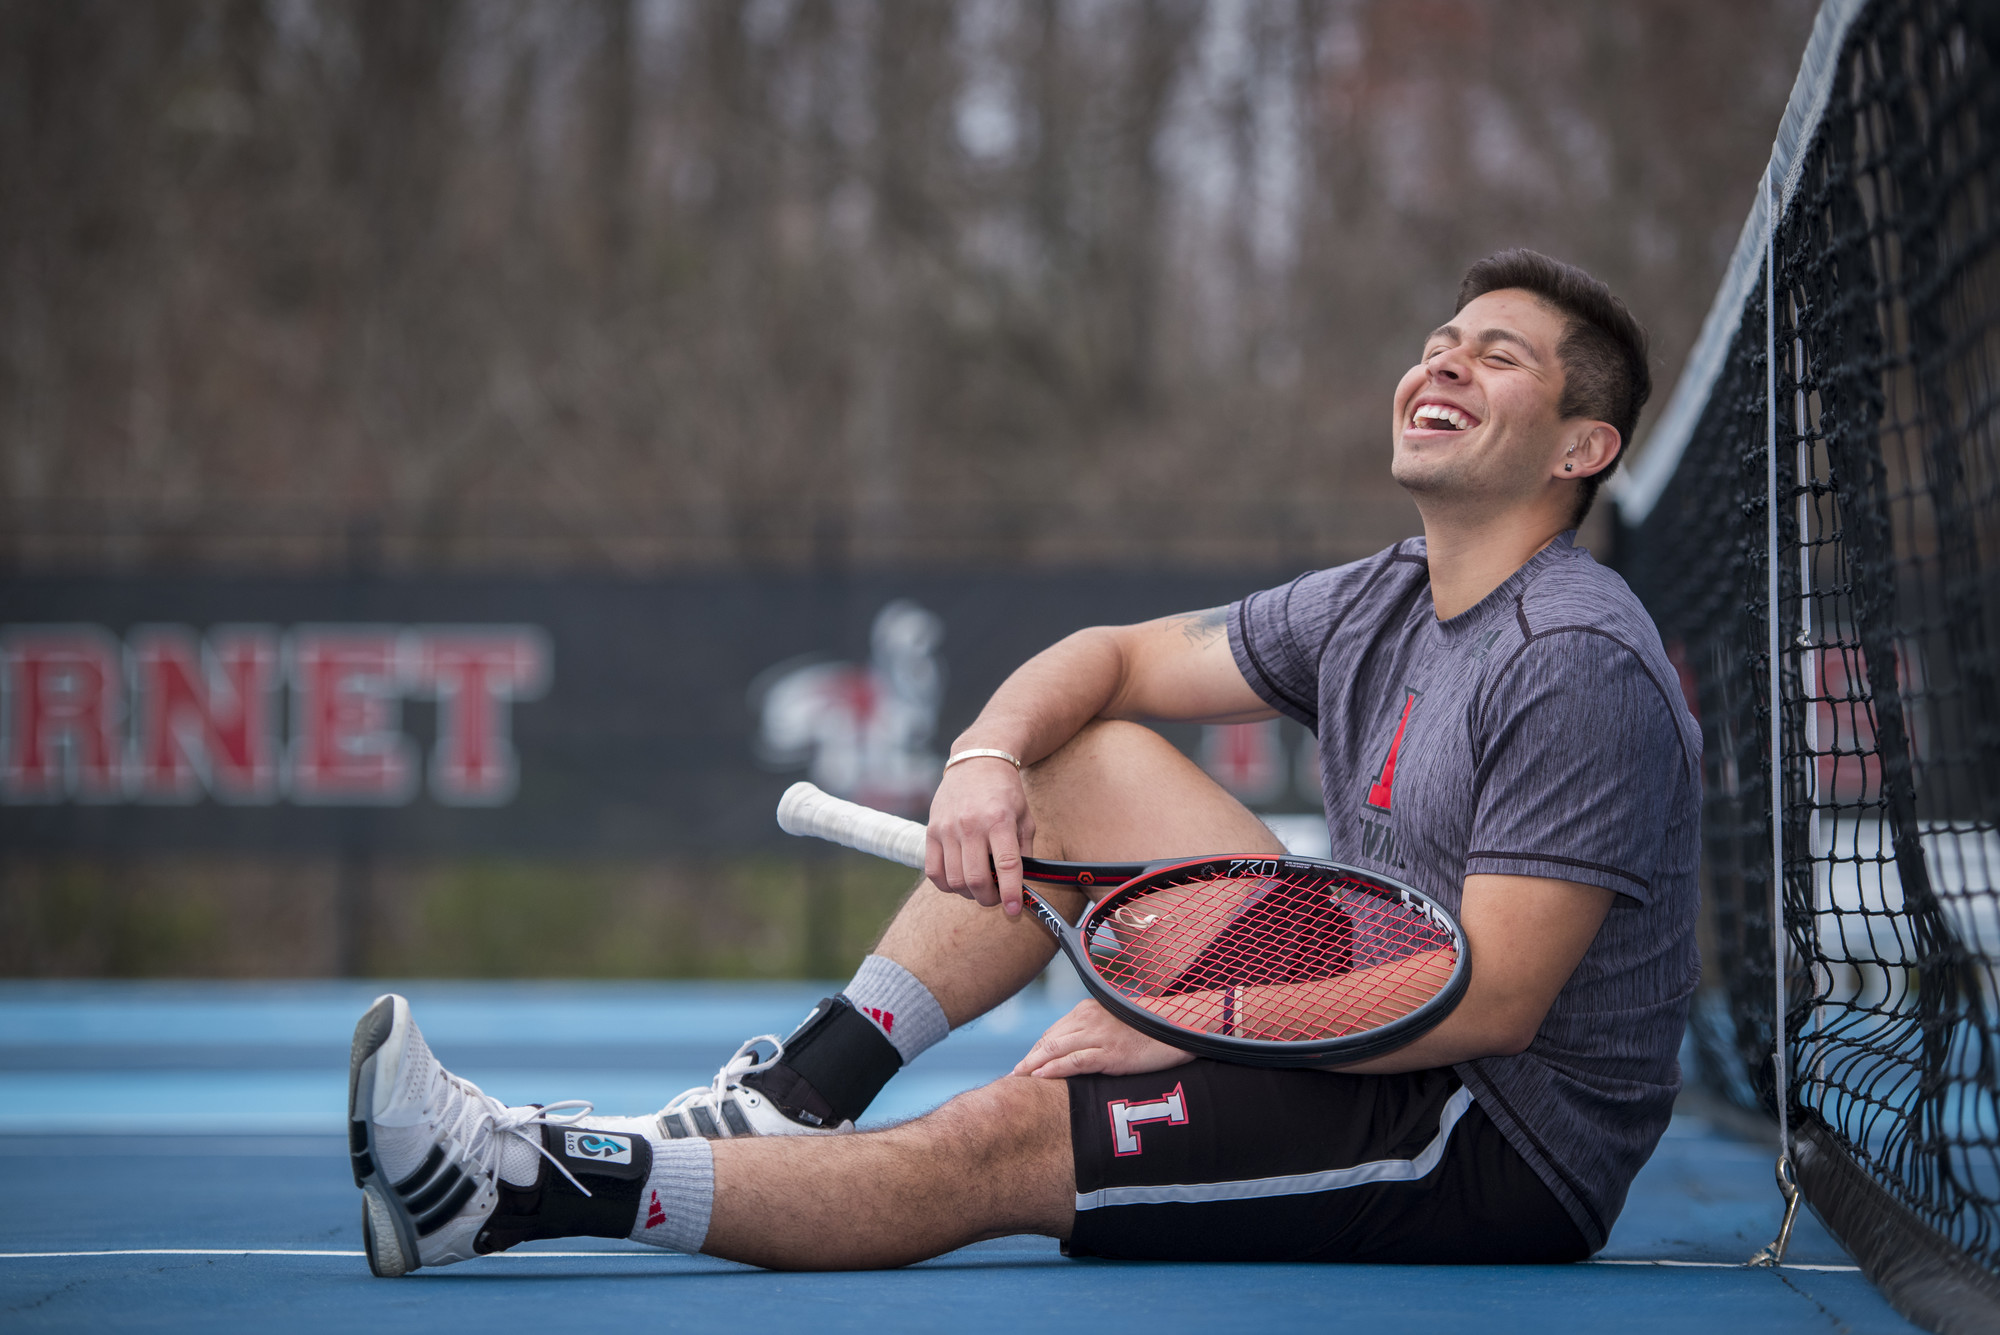 Tennis player shares experience of inclusion in Outsports.com story